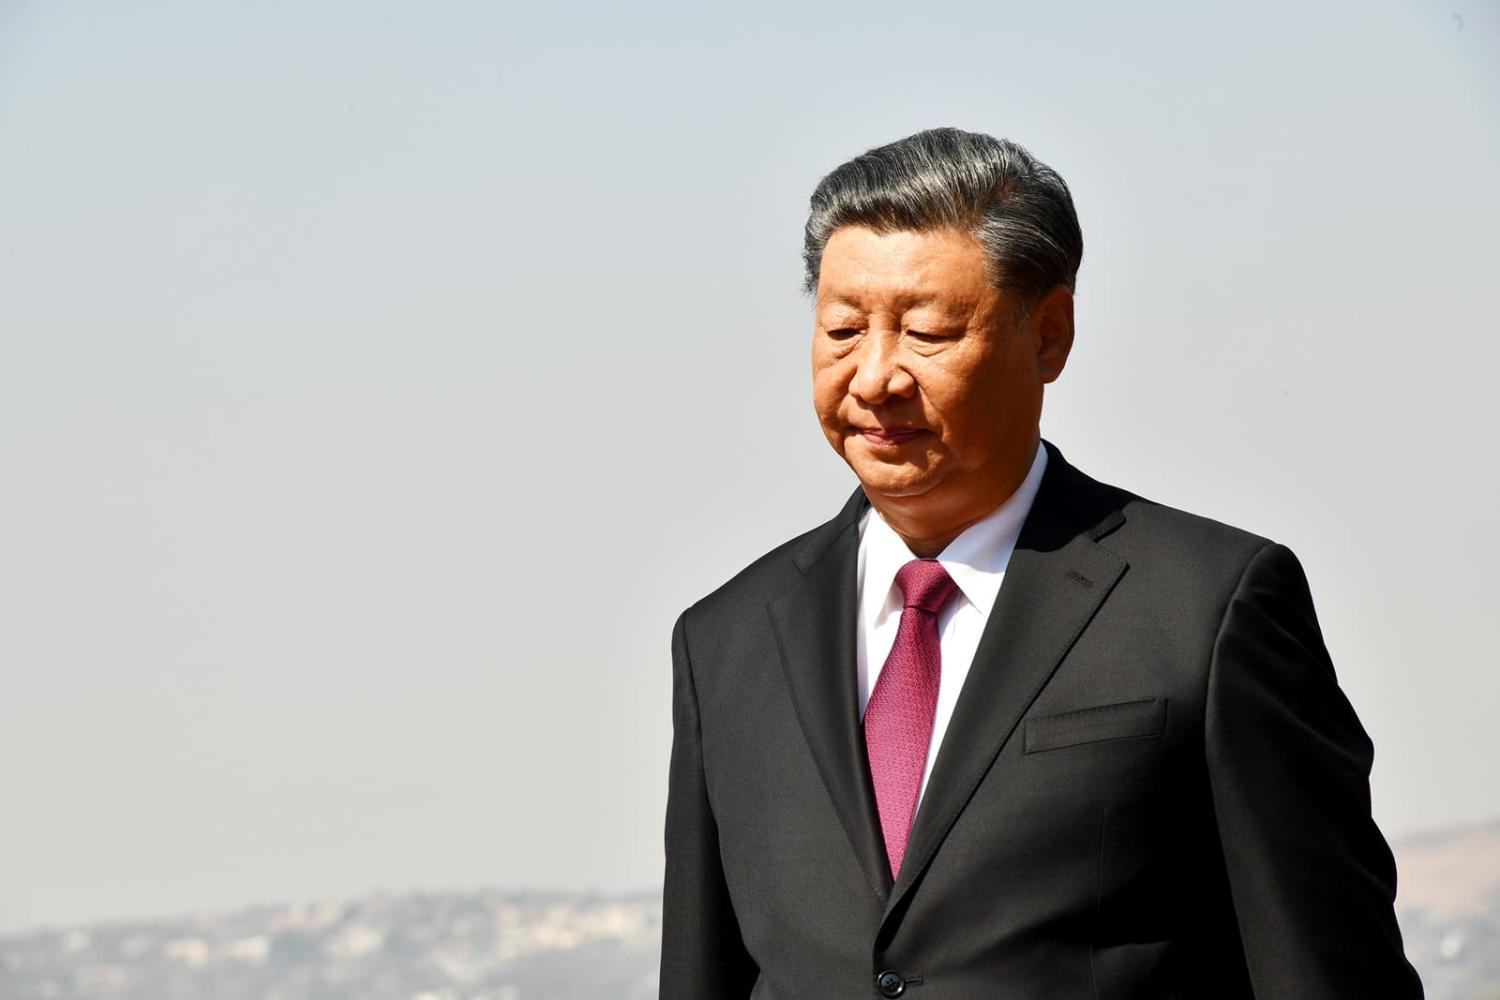 In international affairs, while making some gains in the Global South, Xi Jinping has presided over a deterioration of relations with the United States, Australia, Japan, India and Western Europe (GCIS/GovernmentZA/Flickr)